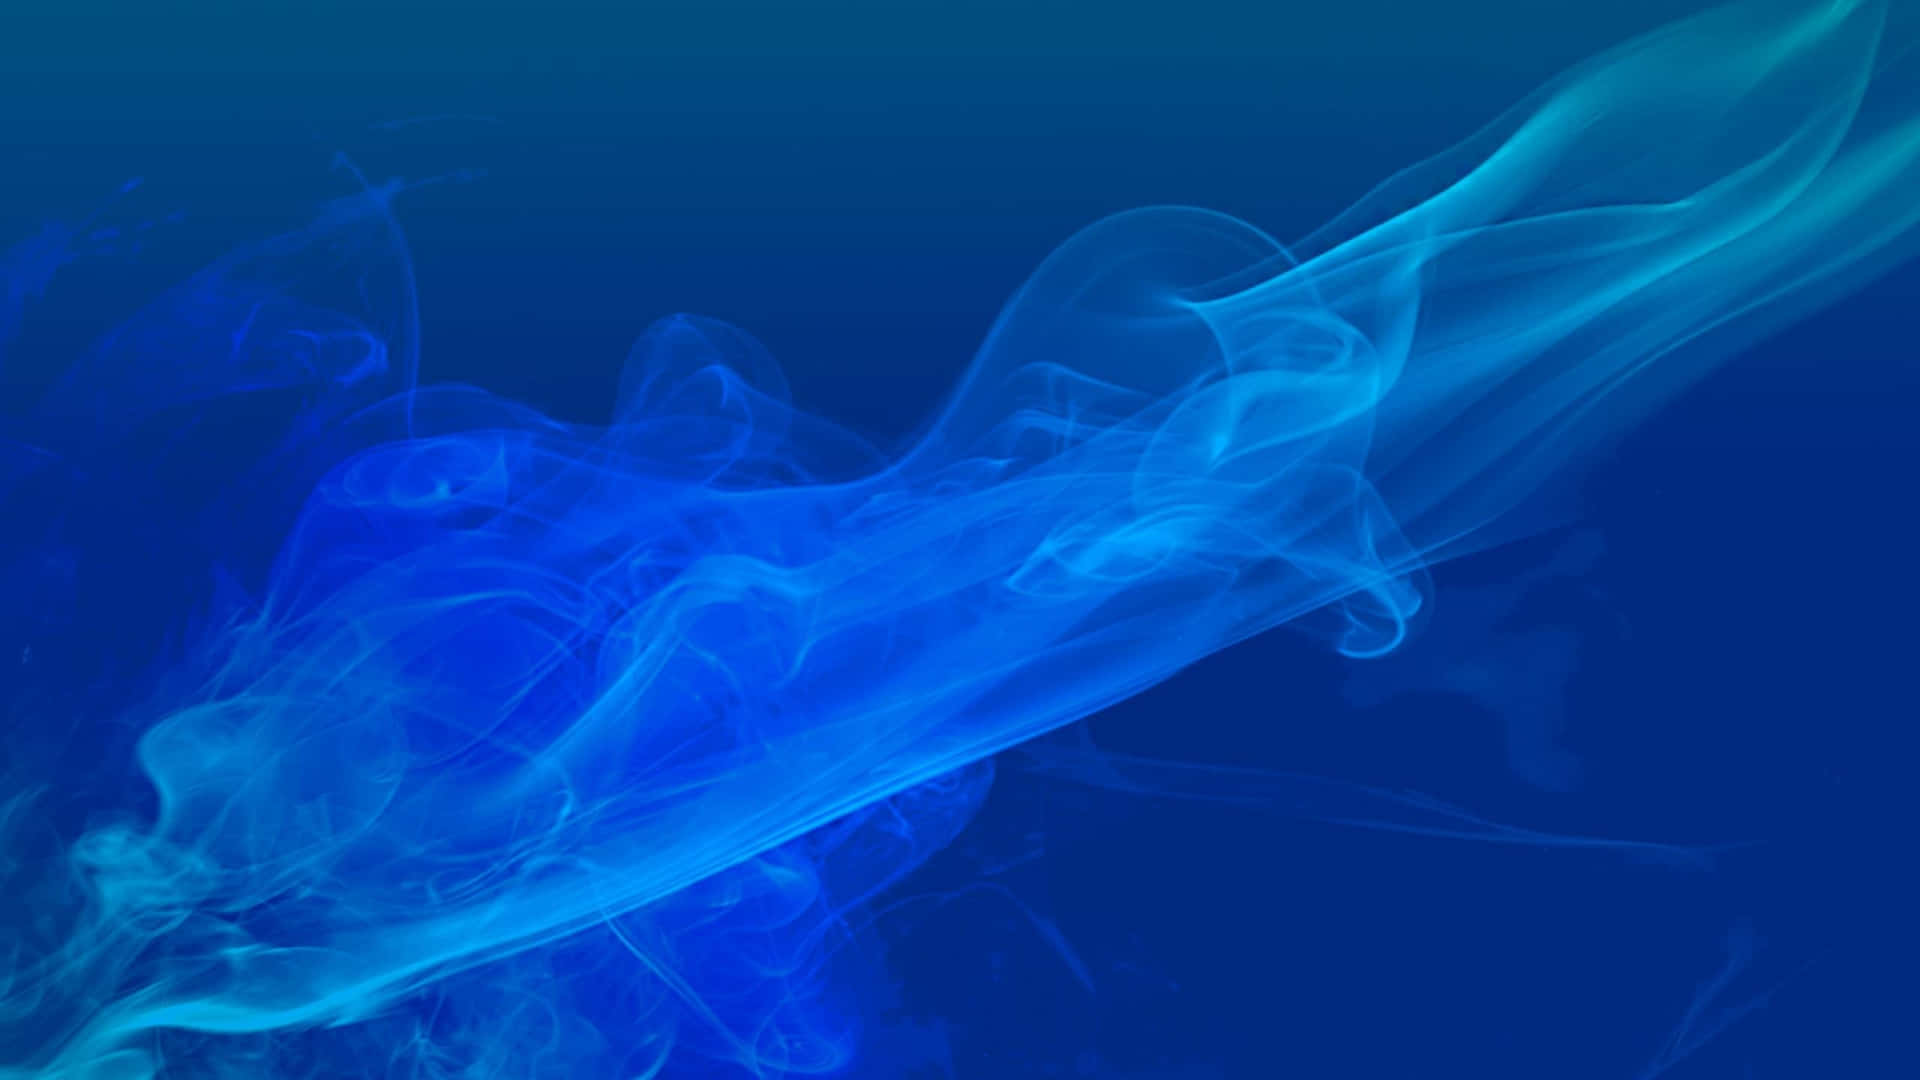 Enjoy a surreal underwater experience with smoke blue wallpaper Wallpaper